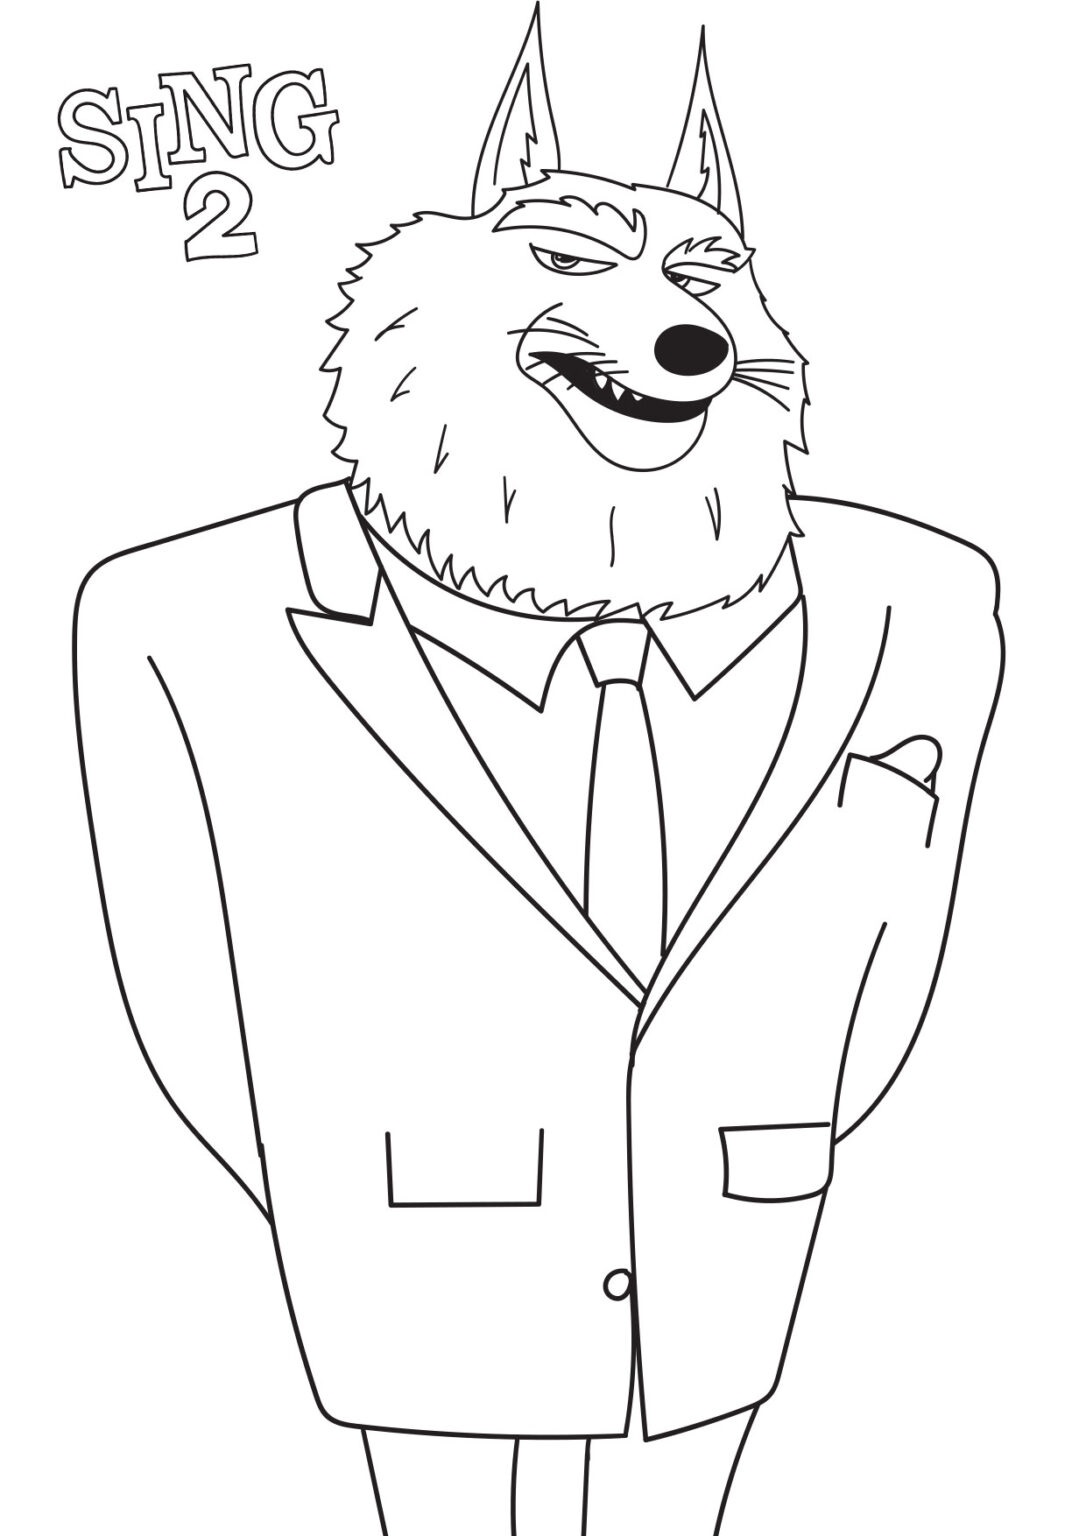 Jimmy Crystal Sing 2 coloring pages